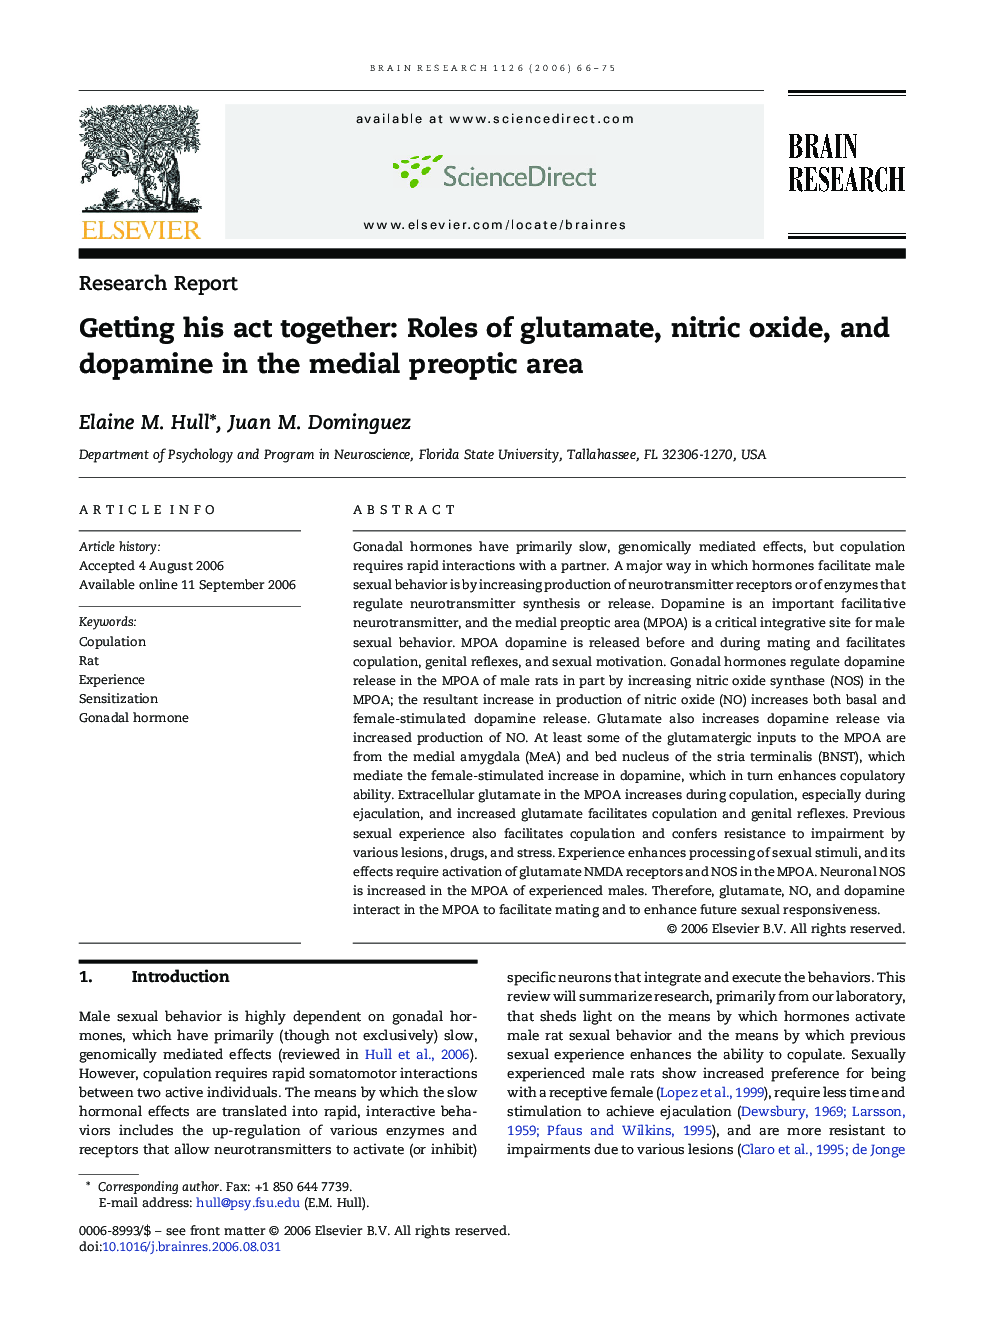 Getting his act together: Roles of glutamate, nitric oxide, and dopamine in the medial preoptic area